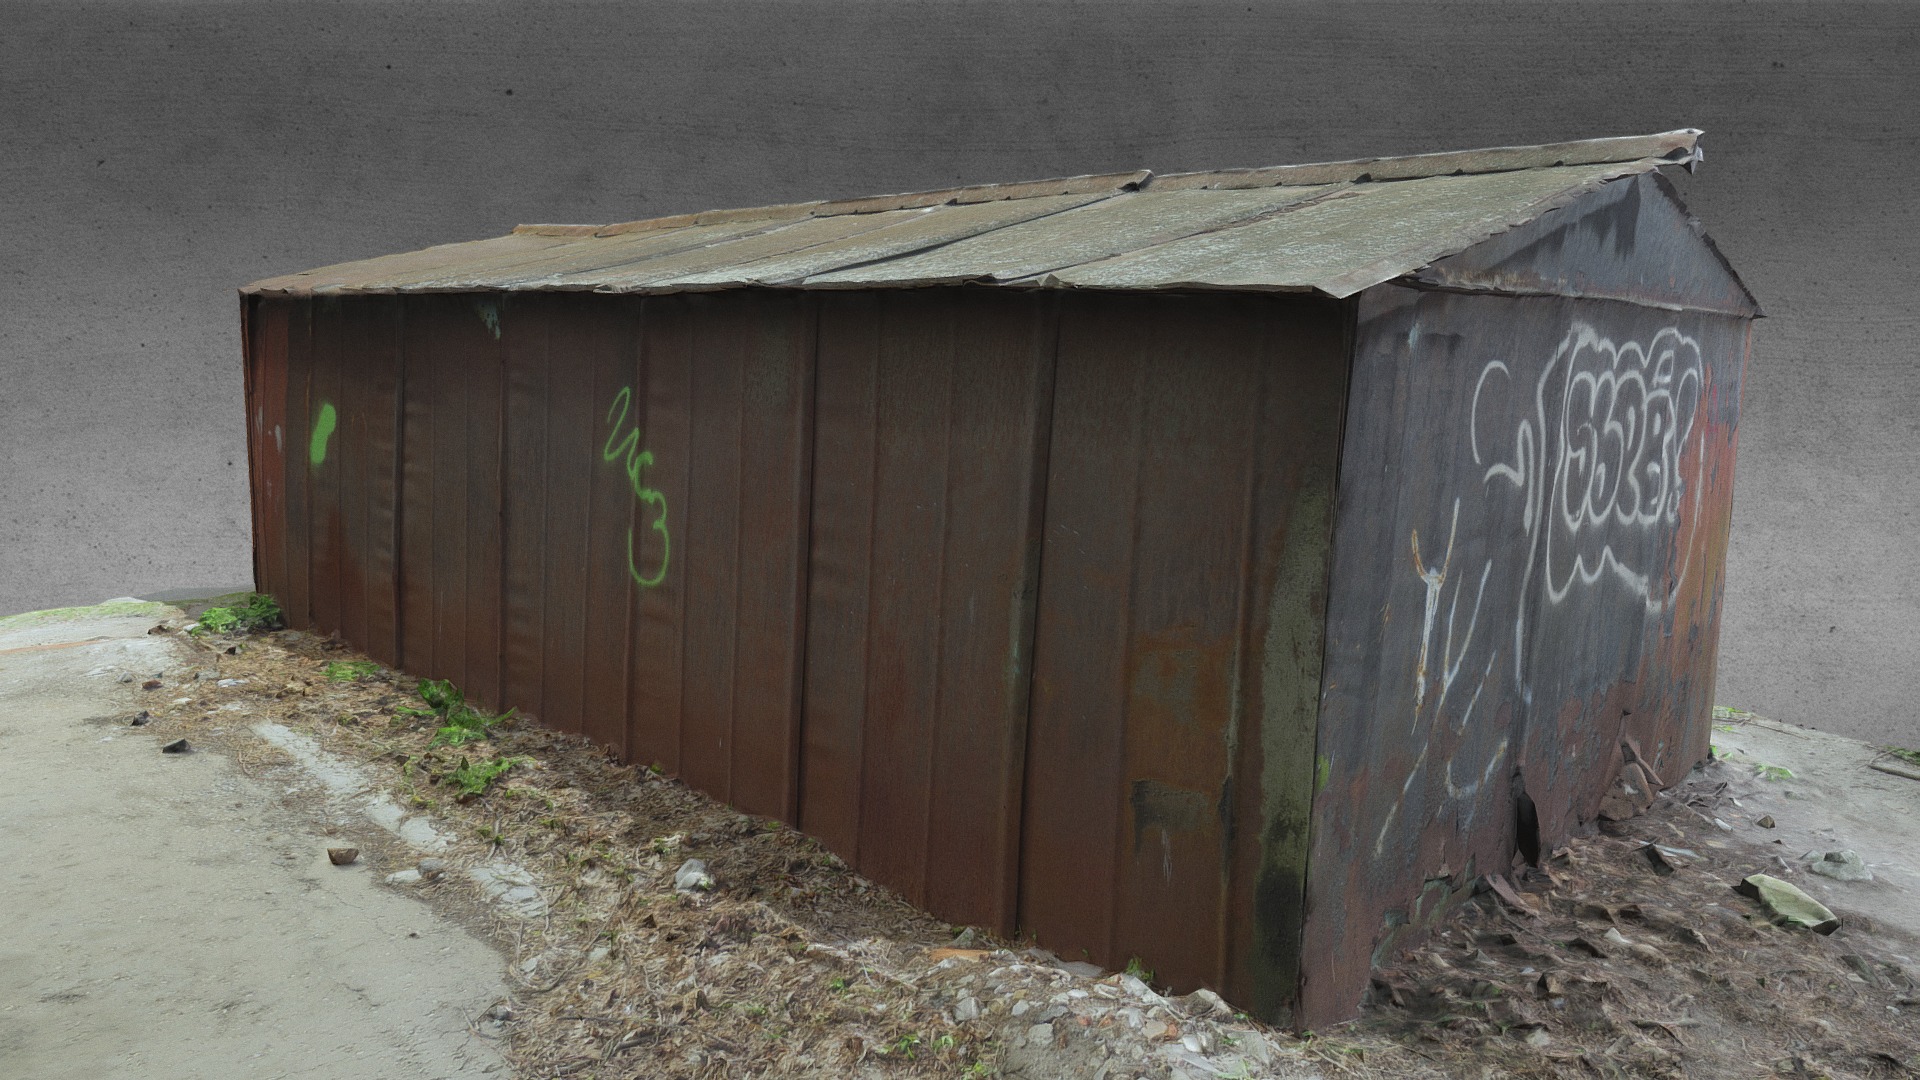 3D model Rusty Metal Garage - This is a 3D model of the Rusty Metal Garage. The 3D model is about a shed with graffiti on it.